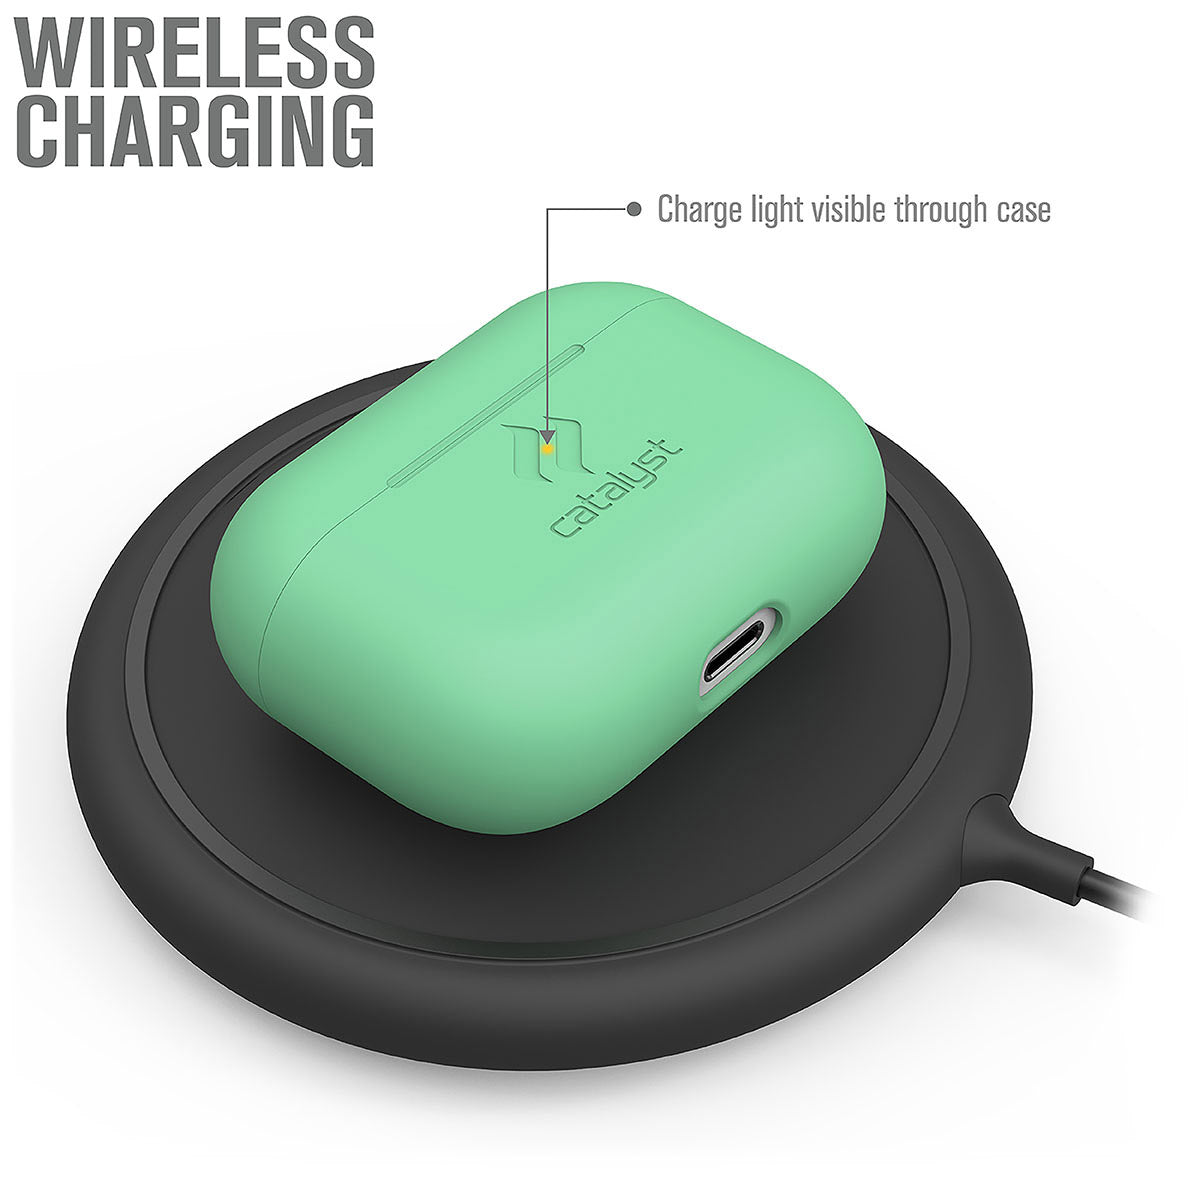 Catalyst airpods pro gen 2/1 slim case showing wireless charging of the case in a mint green colorway